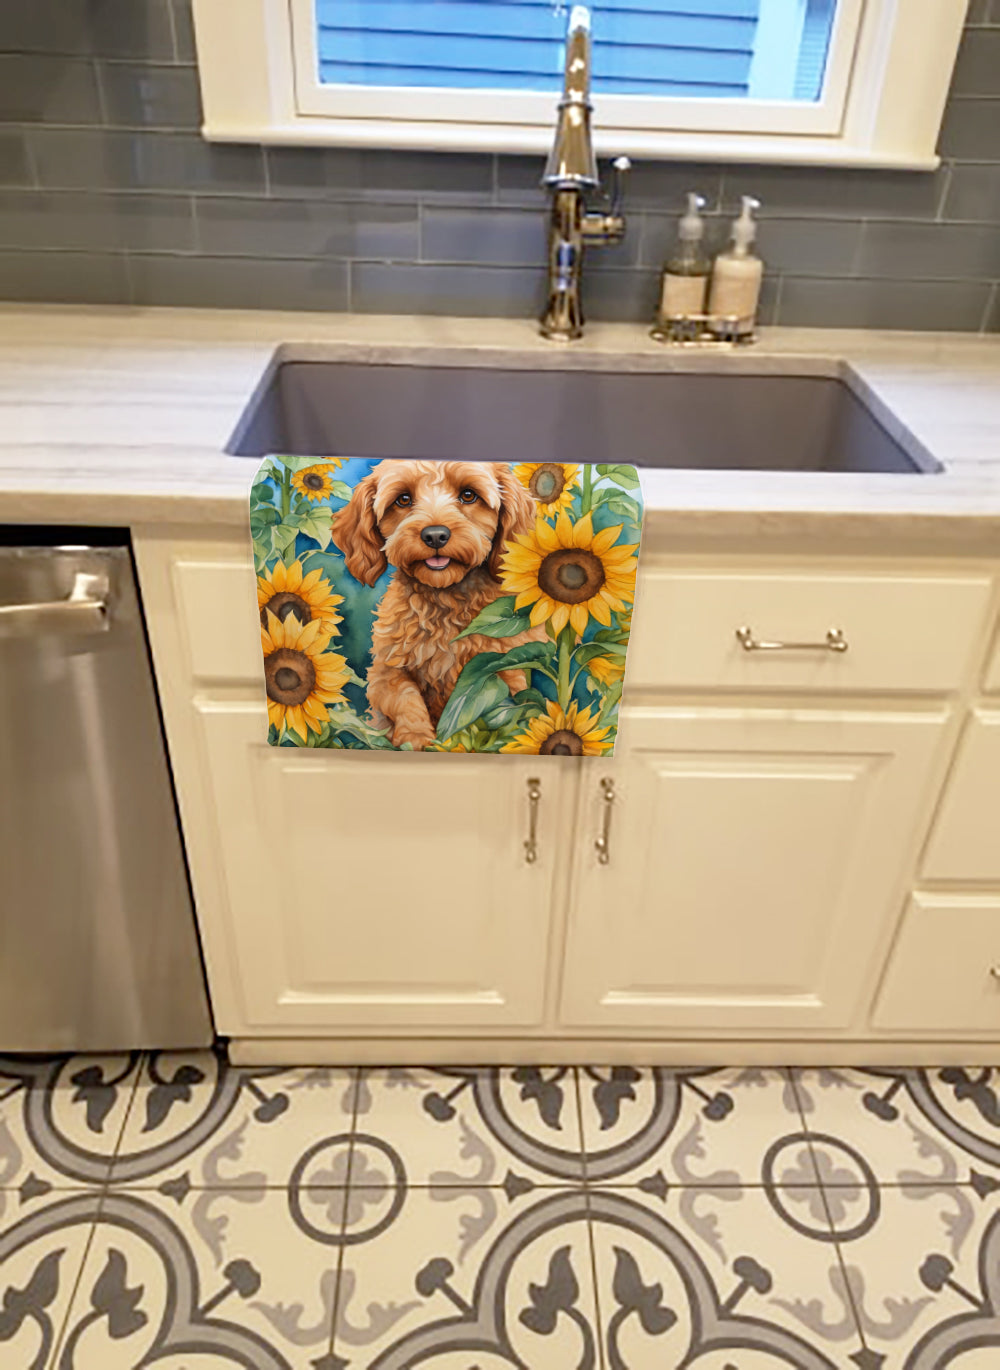 Buy this Cockapoo in Sunflowers Kitchen Towel